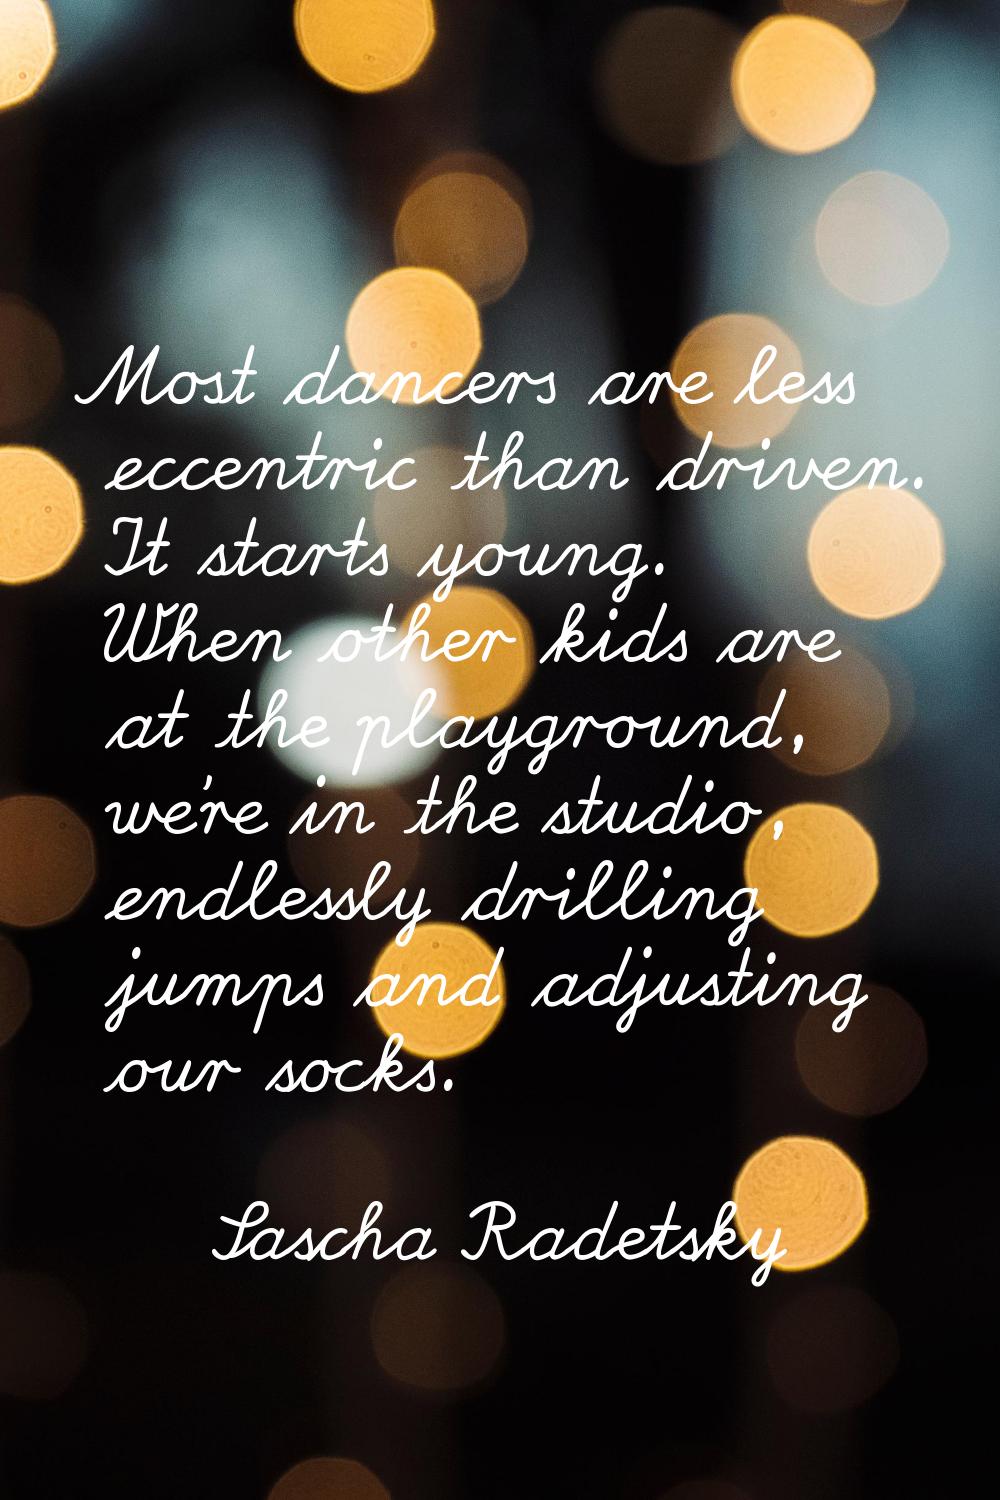 Most dancers are less eccentric than driven. It starts young. When other kids are at the playground